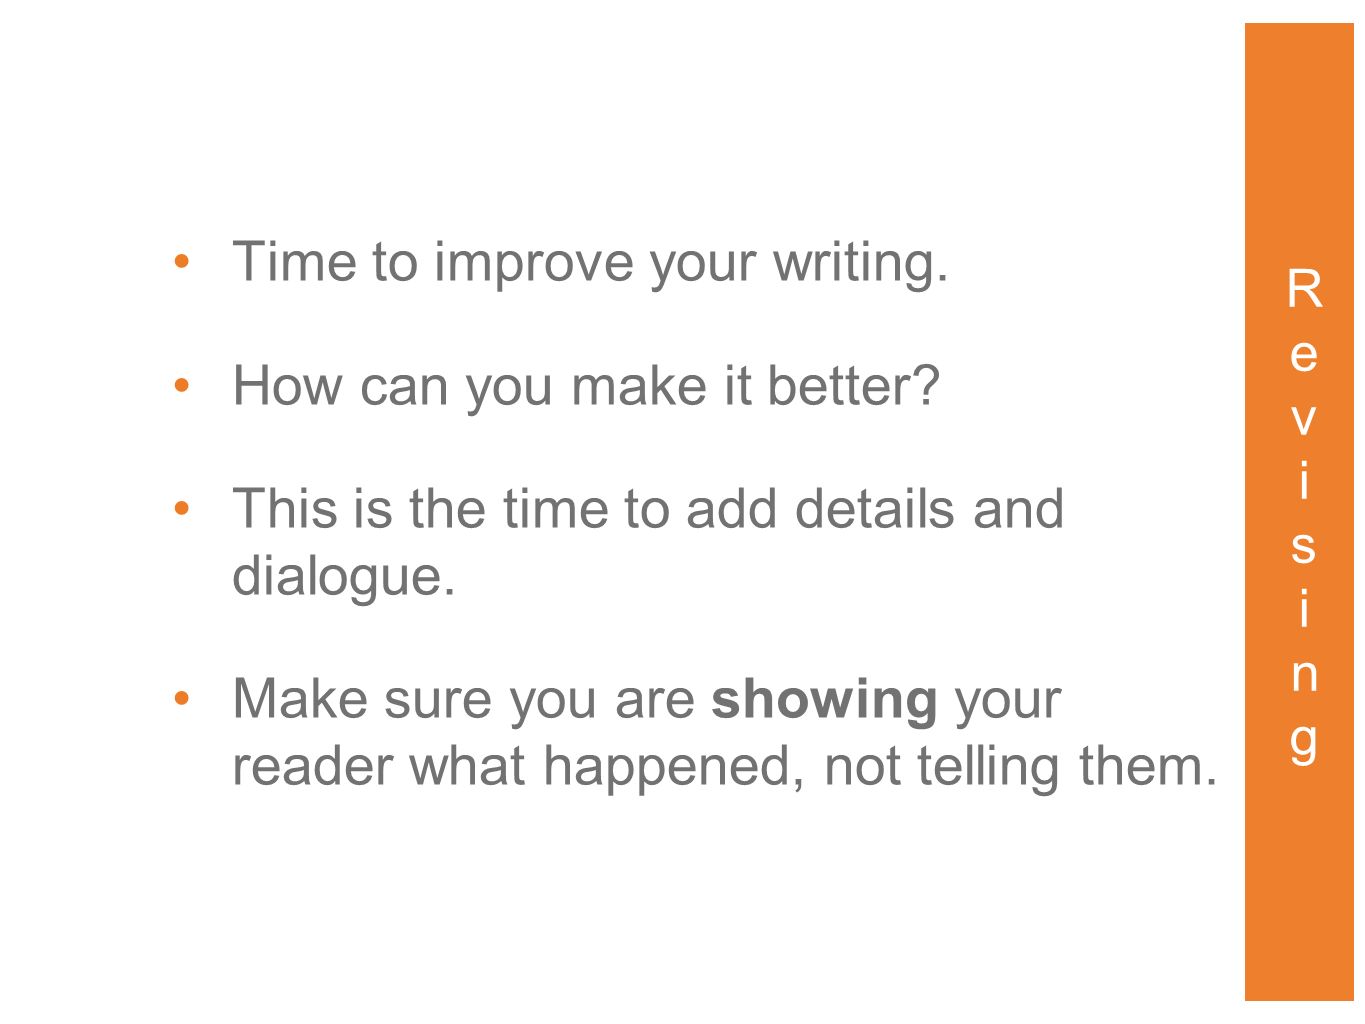 Time to improve your writing. How can you make it better.